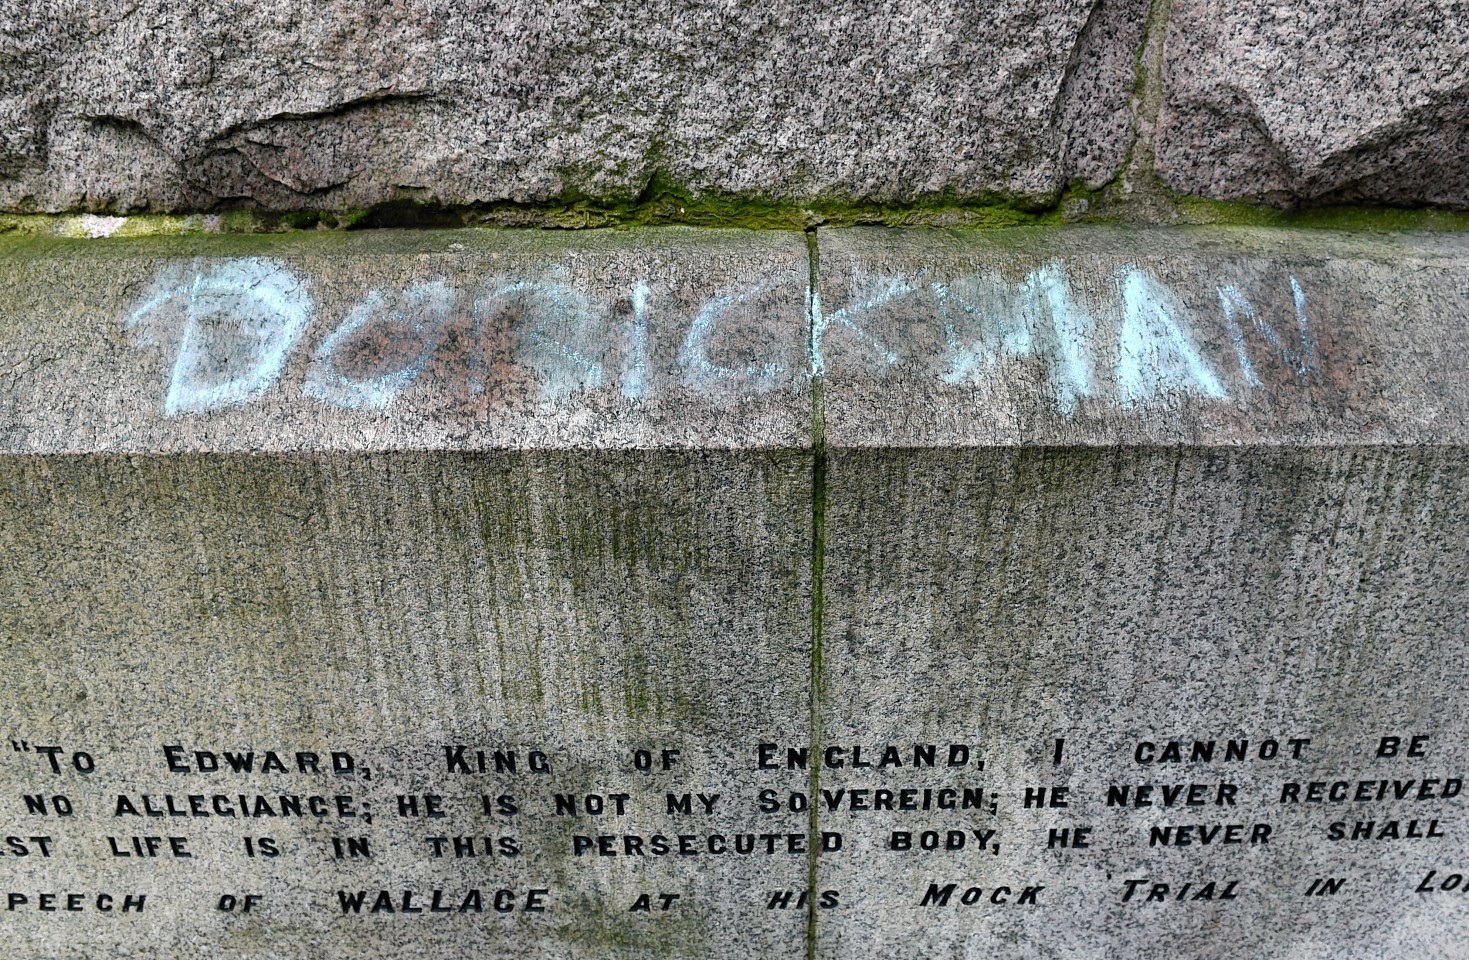 Graffitti on the plinth of the William Wallace statue